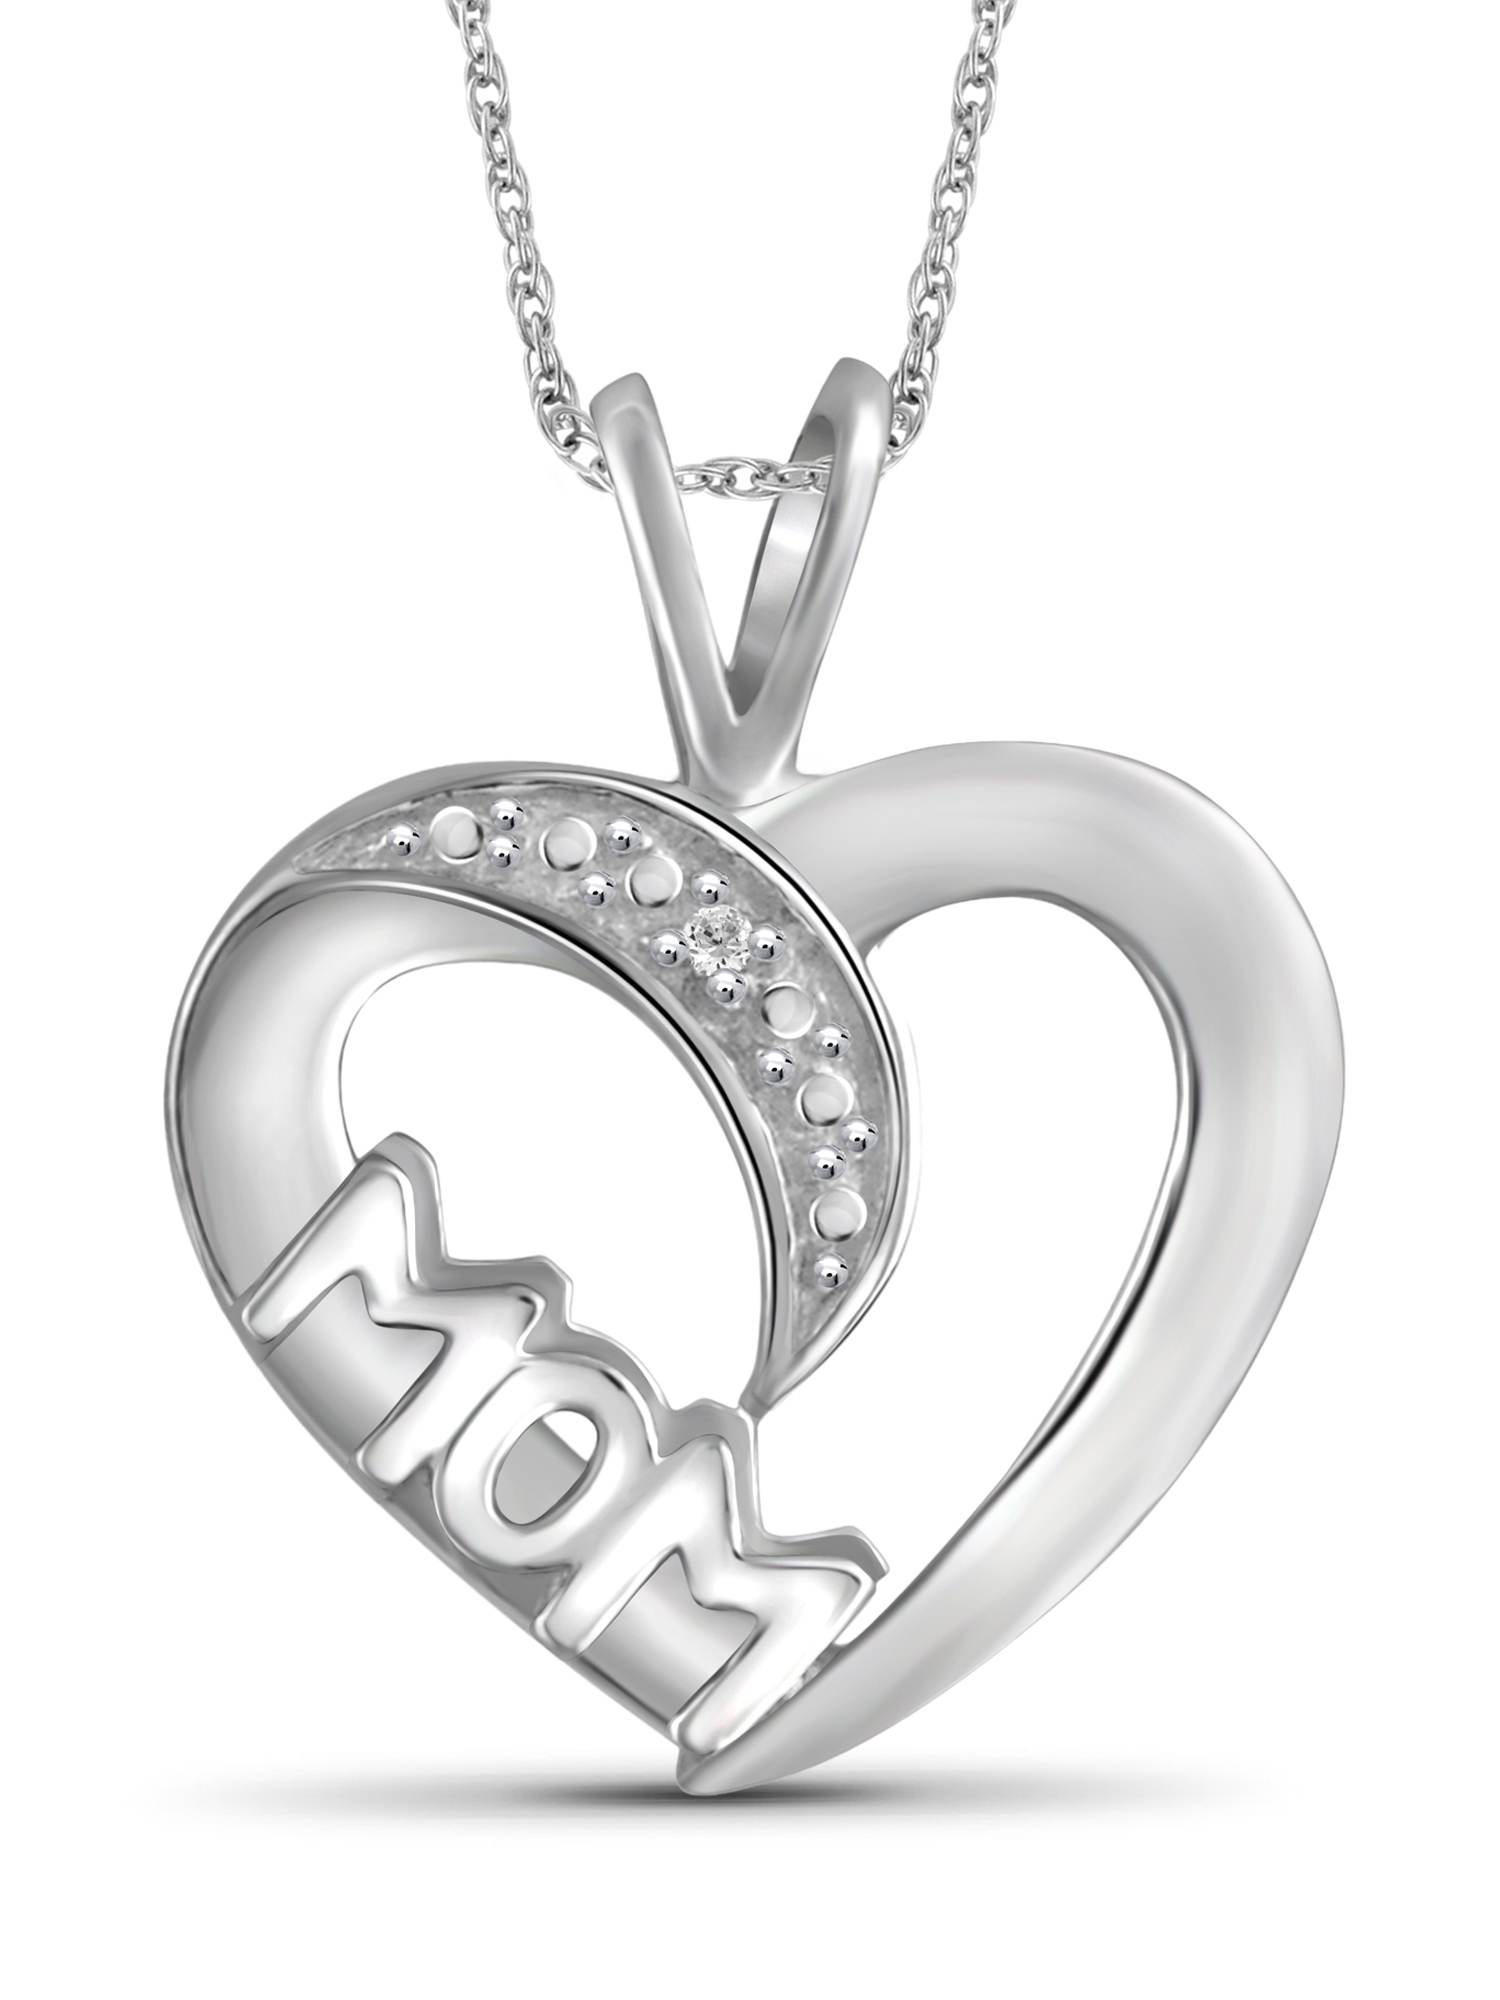 White Diamond Accent Sterling Silver Mother Heart Pendant - image 1 of 5